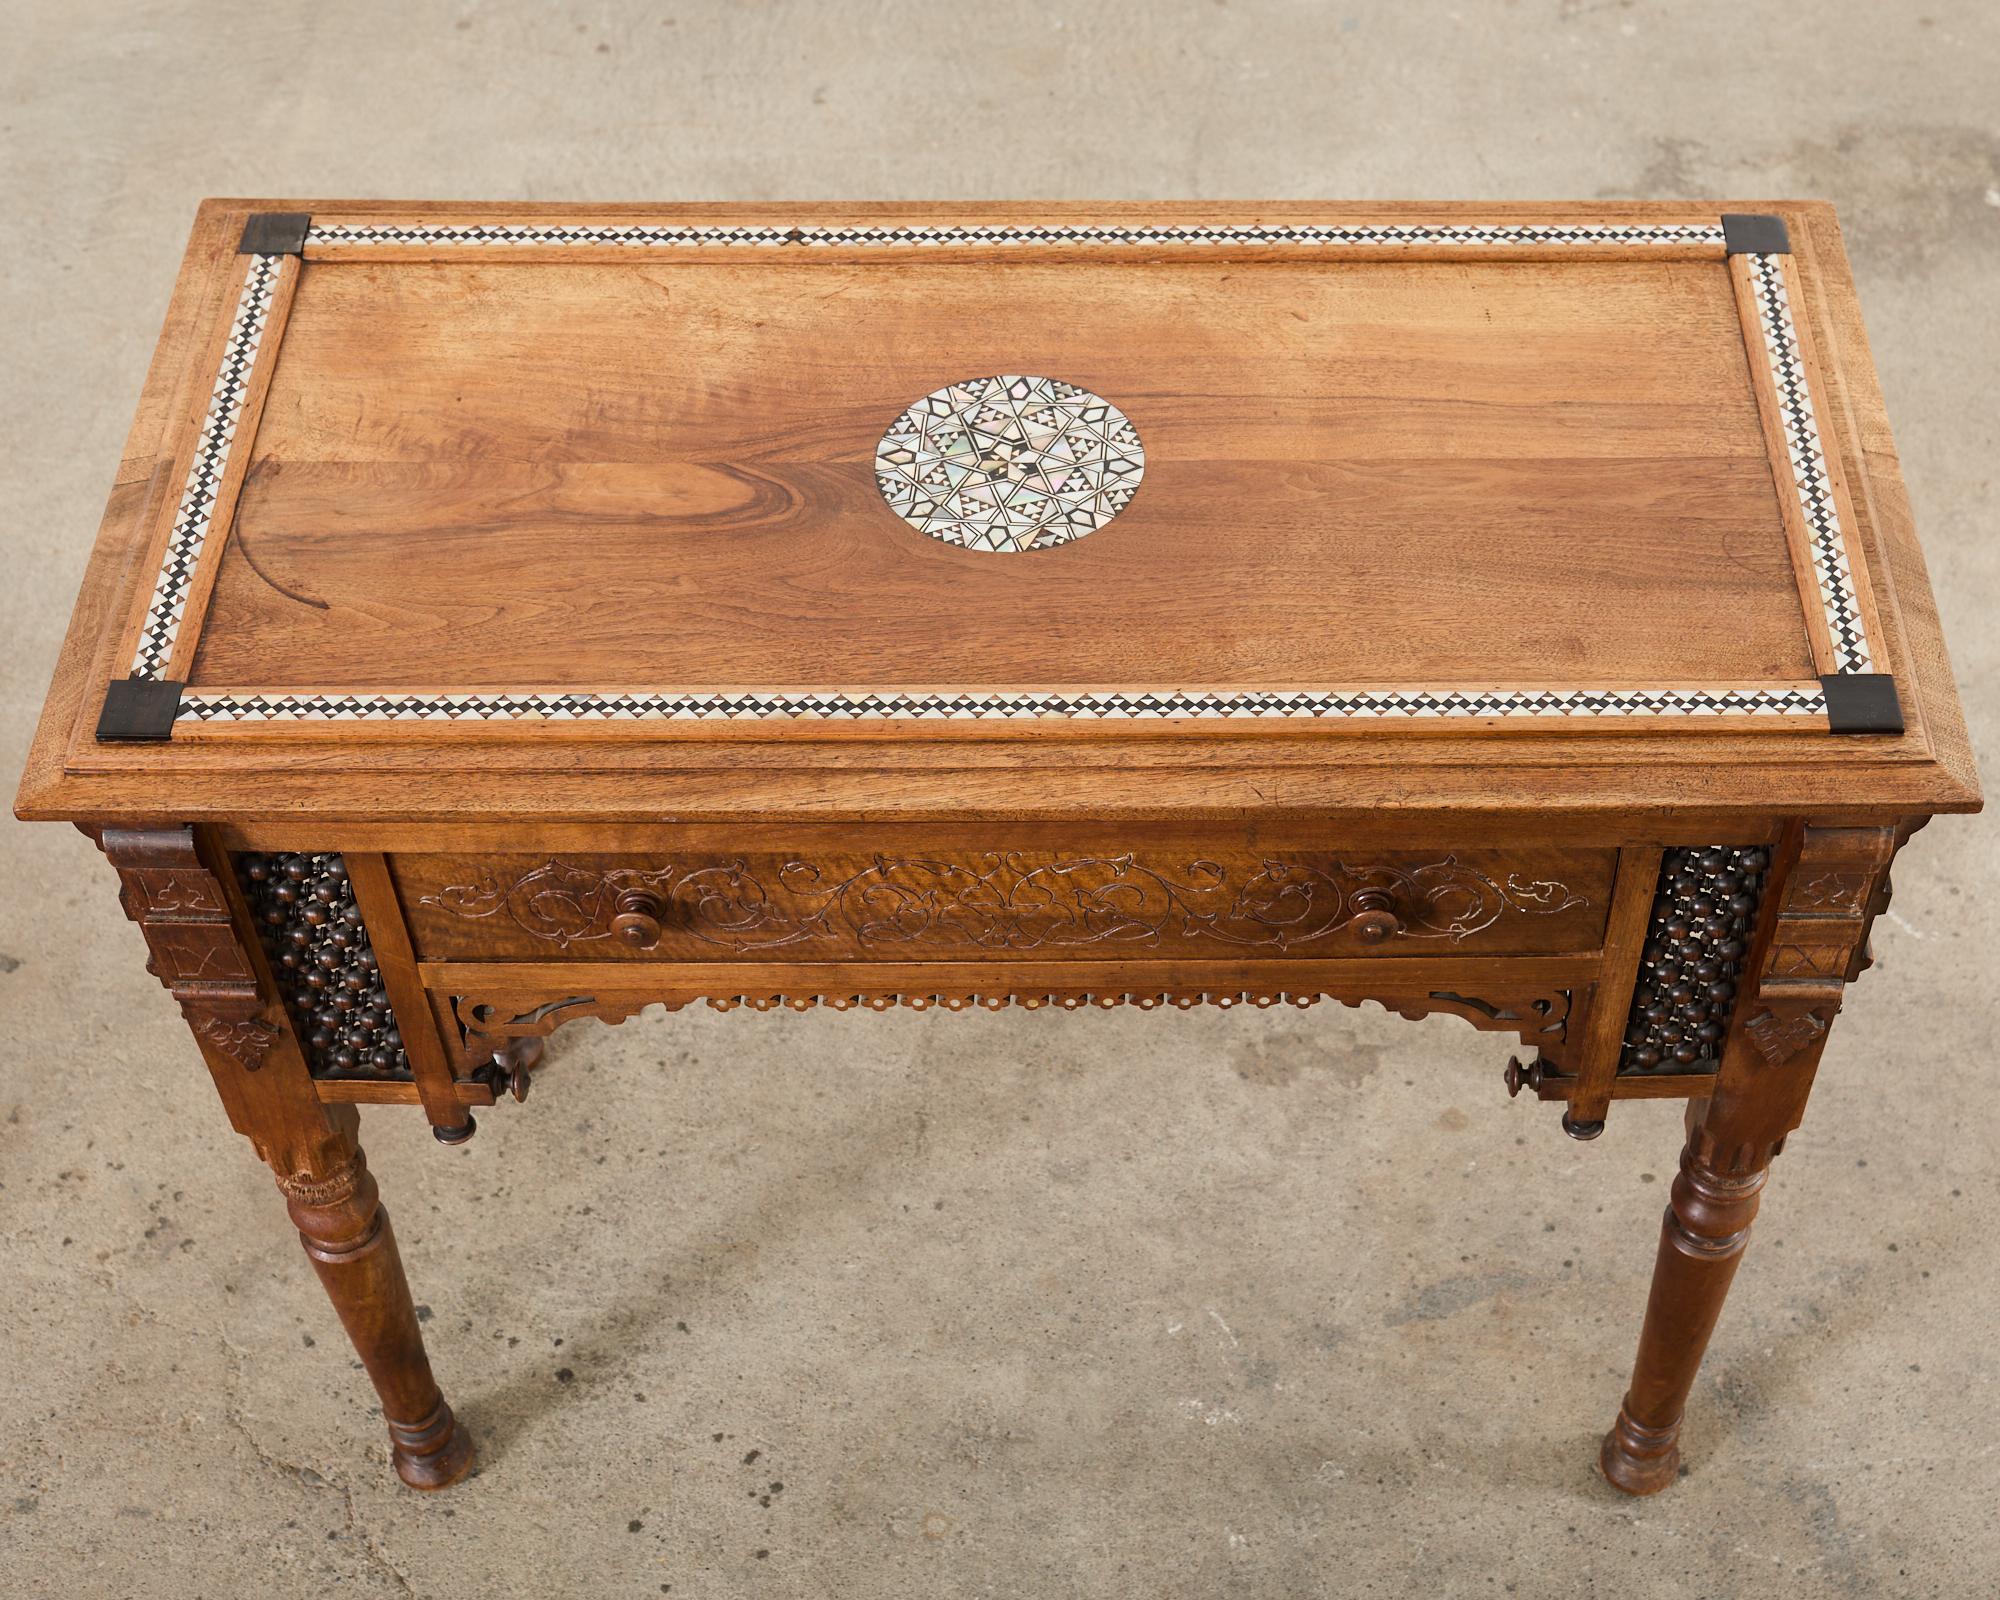 Hand-Crafted Aesthetic Movement Moorish Style Inlay Writing Table Desk For Sale